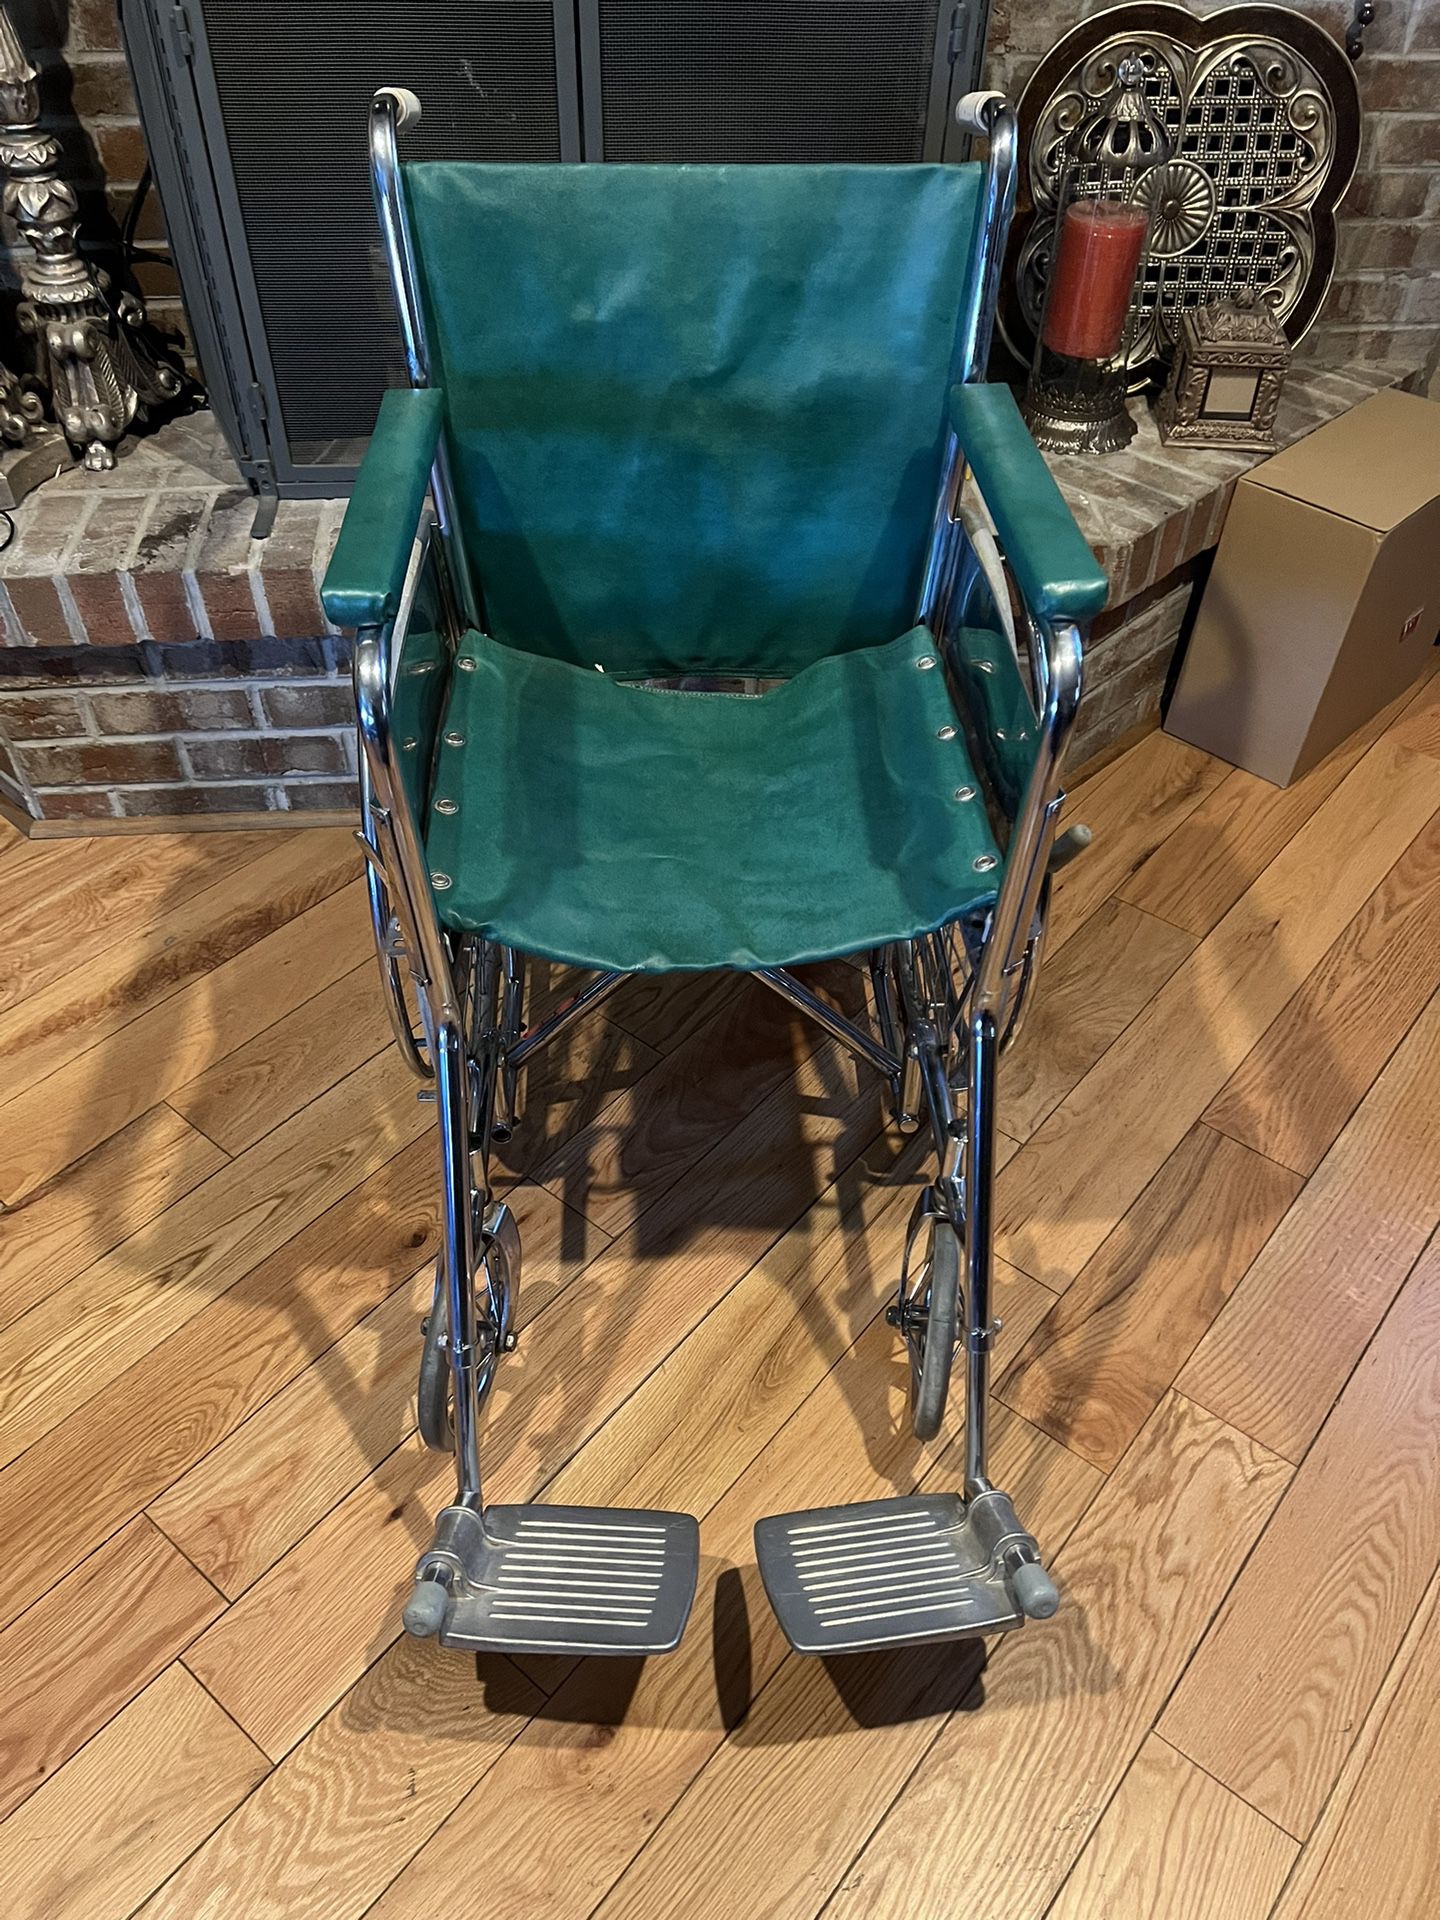 Wheel Chair In Good Condition.